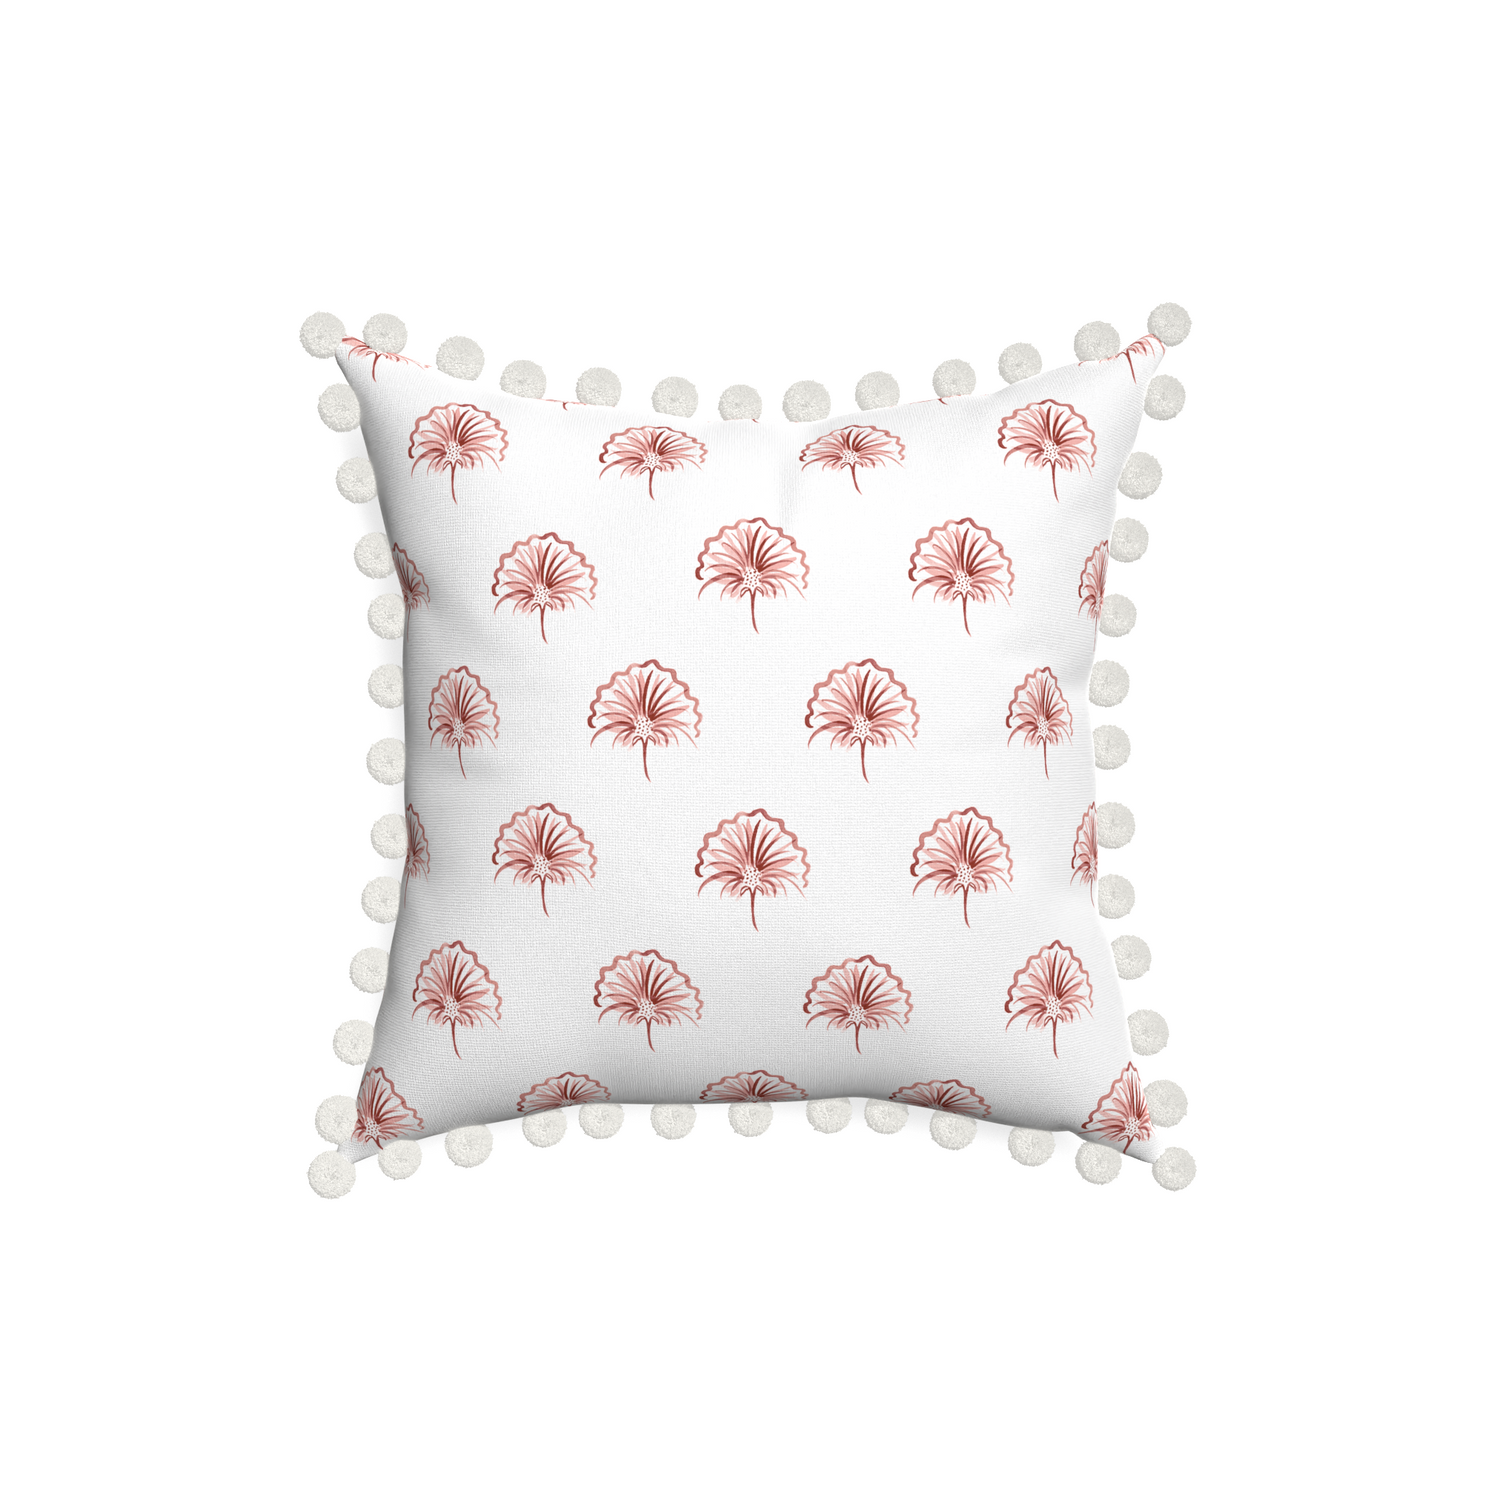 18-square penelope rose custom floral pinkpillow with snow pom pom on white background